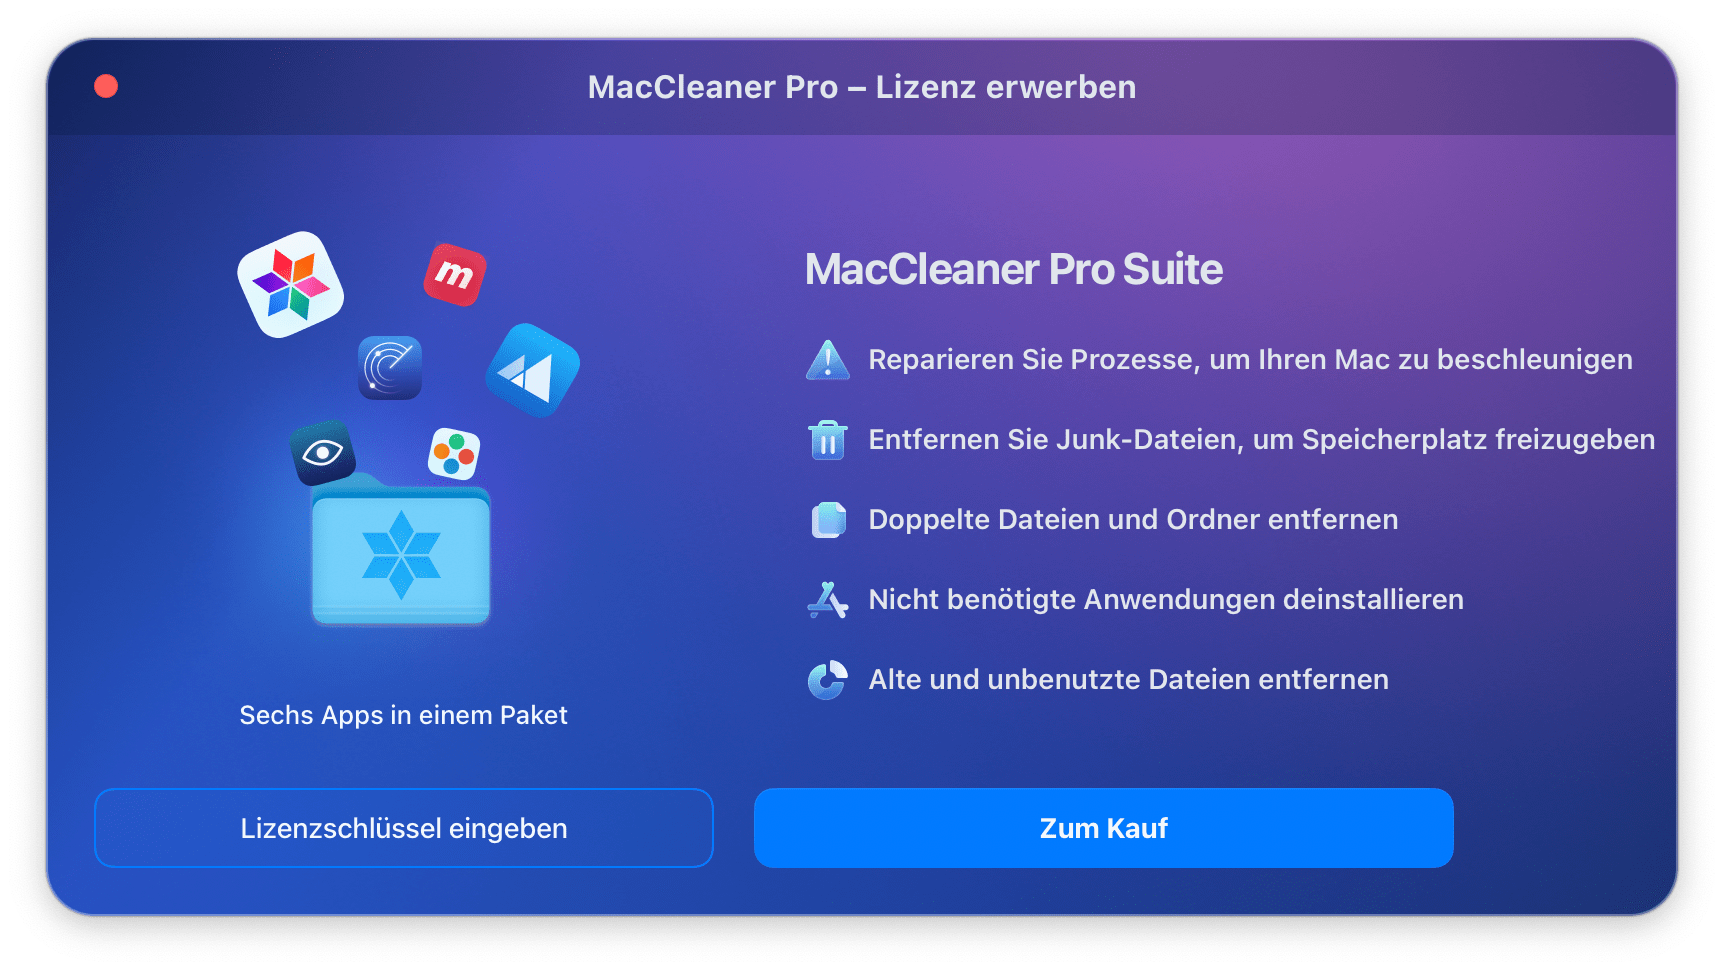 getting license popup for MacCleaner Pro